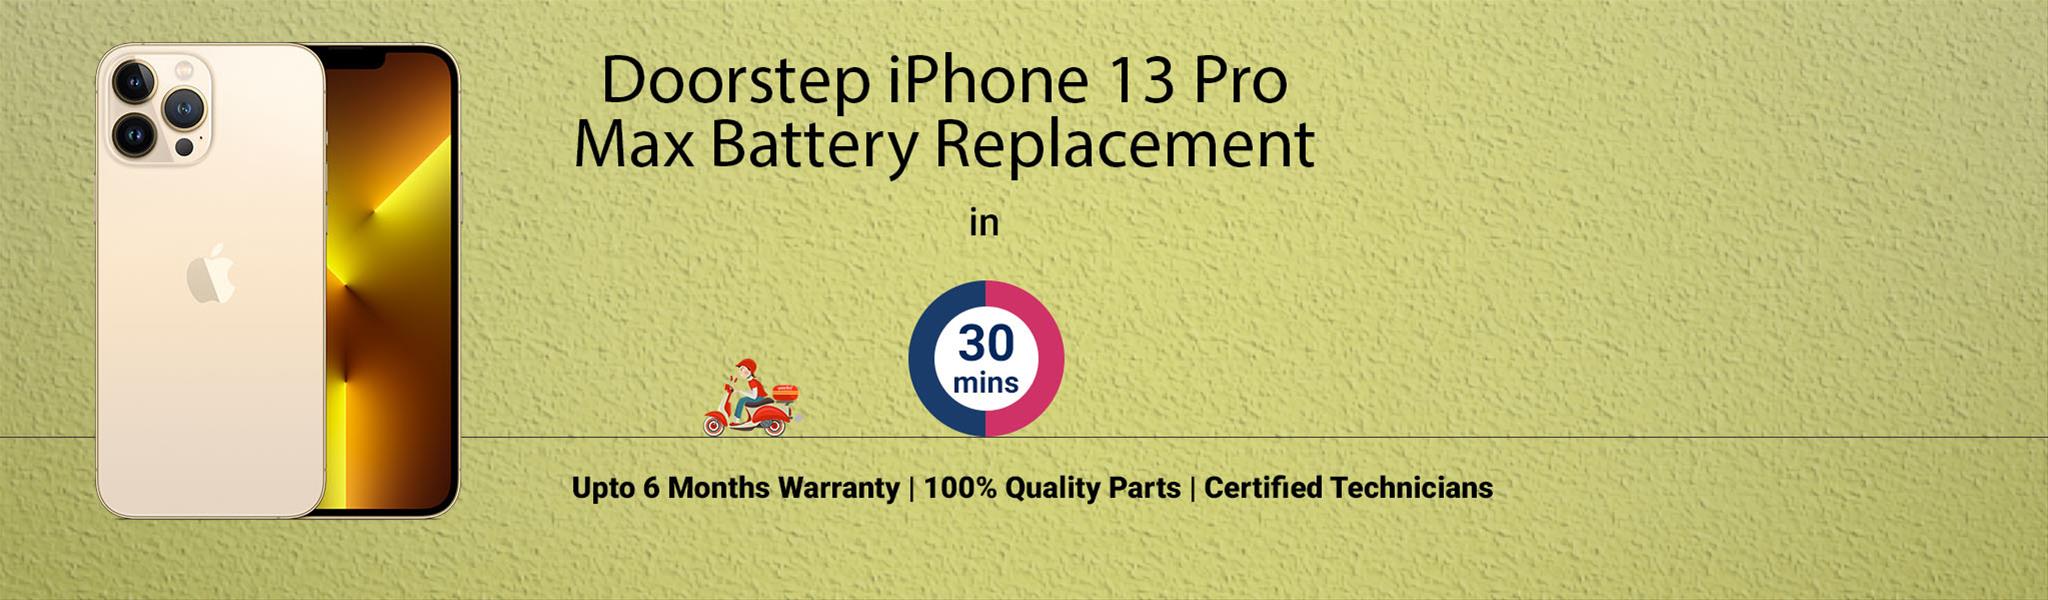 iphone-13-pro-max-battery-replacement.jpg